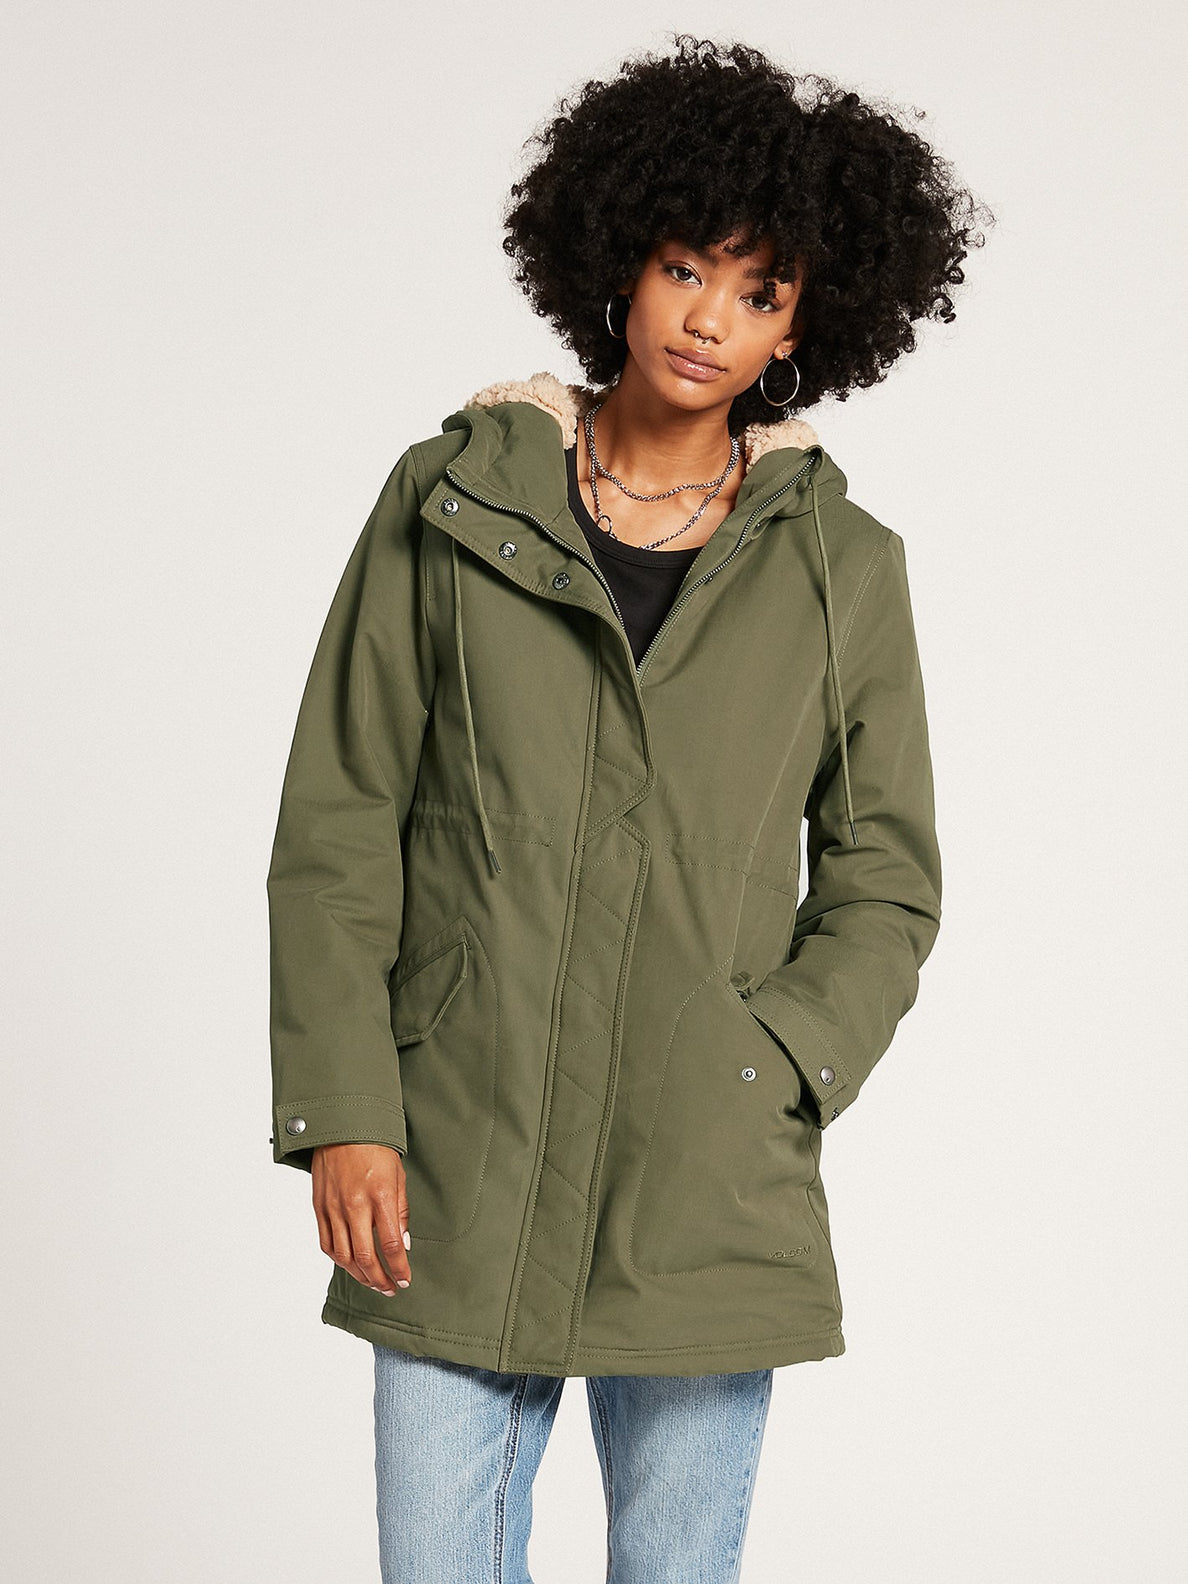 Less Is More 5K Parka - ARMY GREEN COMBO (B1732112_ARC) [F]